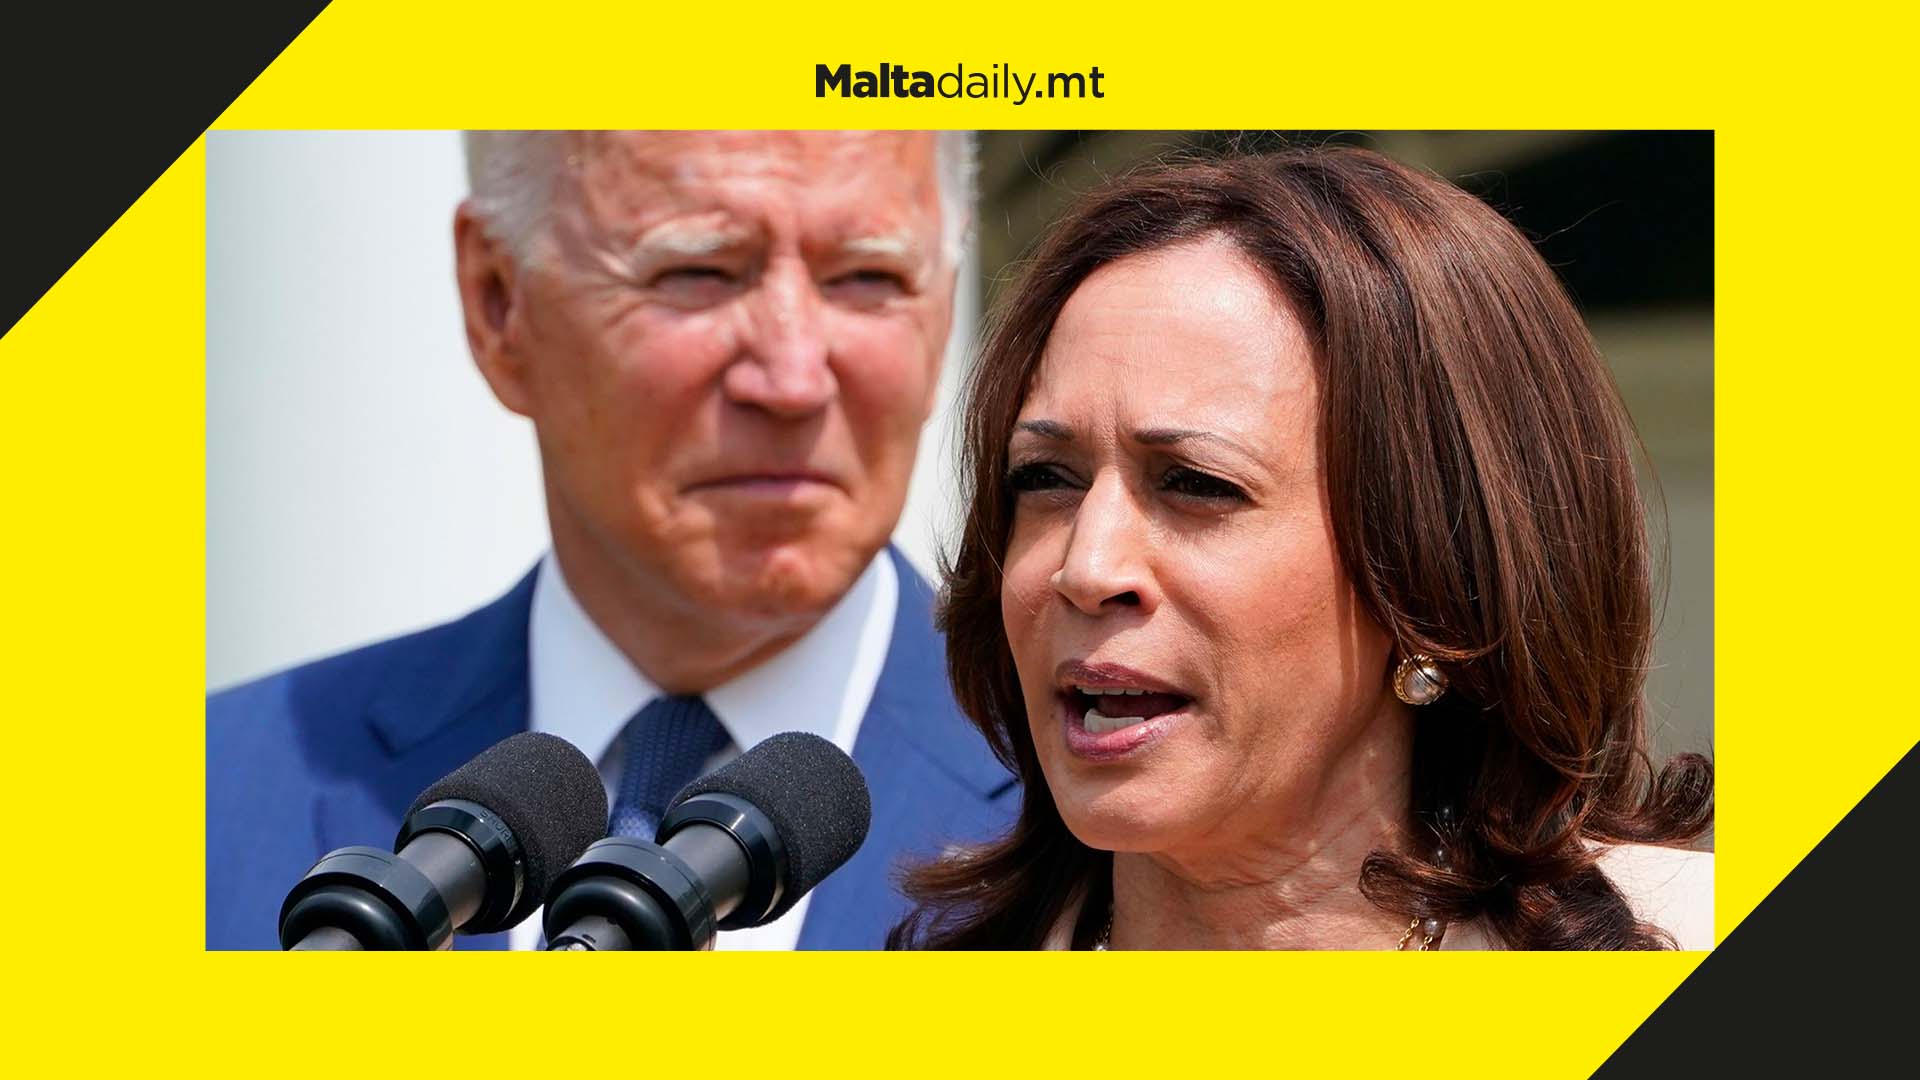 For 85 minutes, VP Kamala Harris became the President of the United States